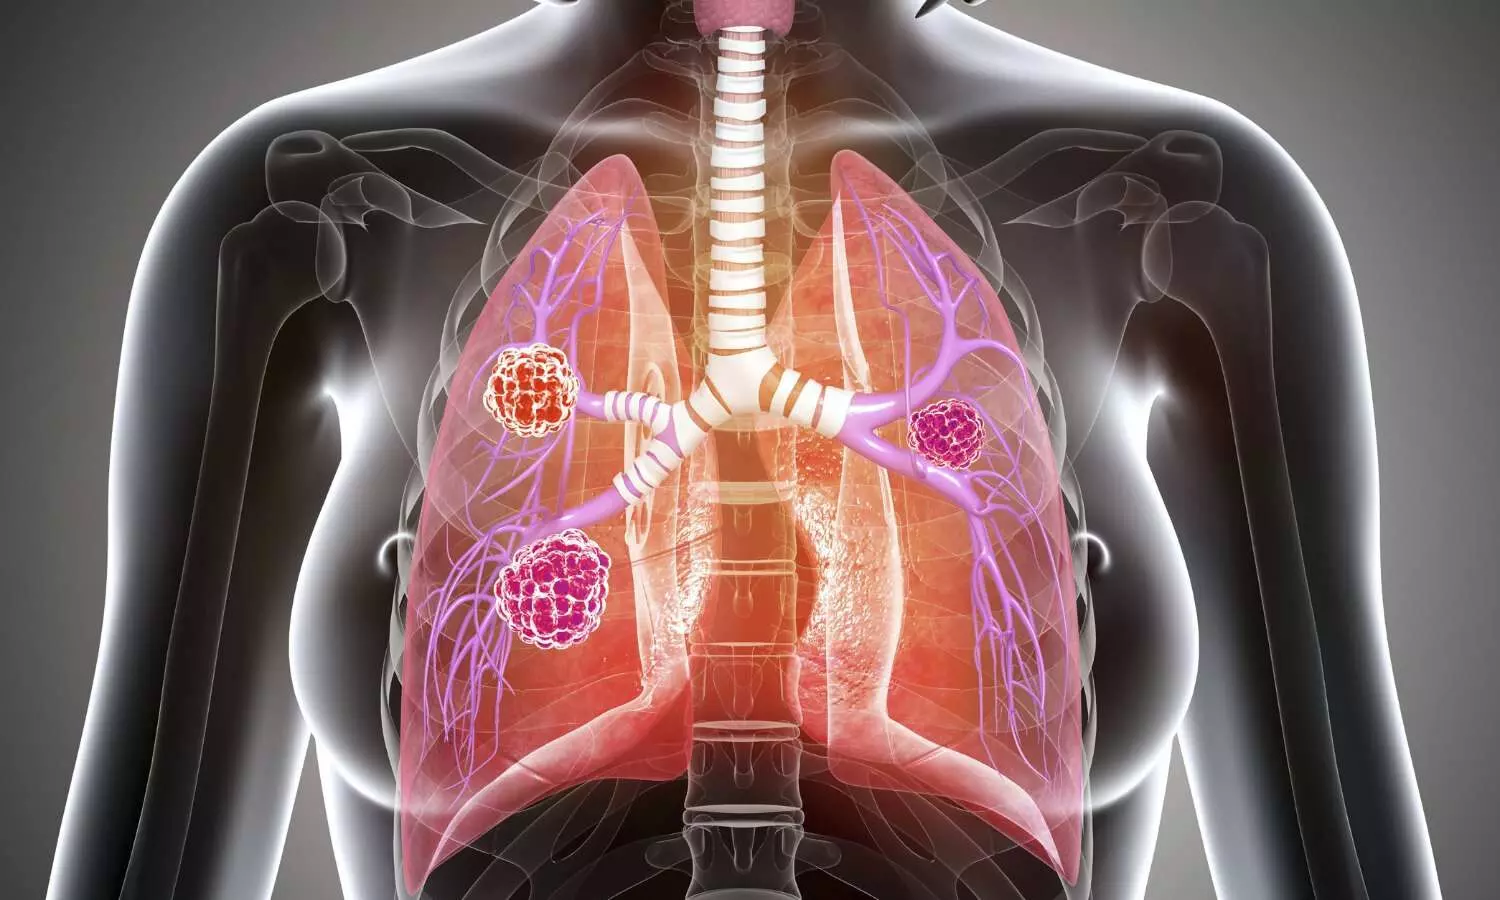 Lung cancer diagnosis at early stage via CT screening increases long-term survival rate